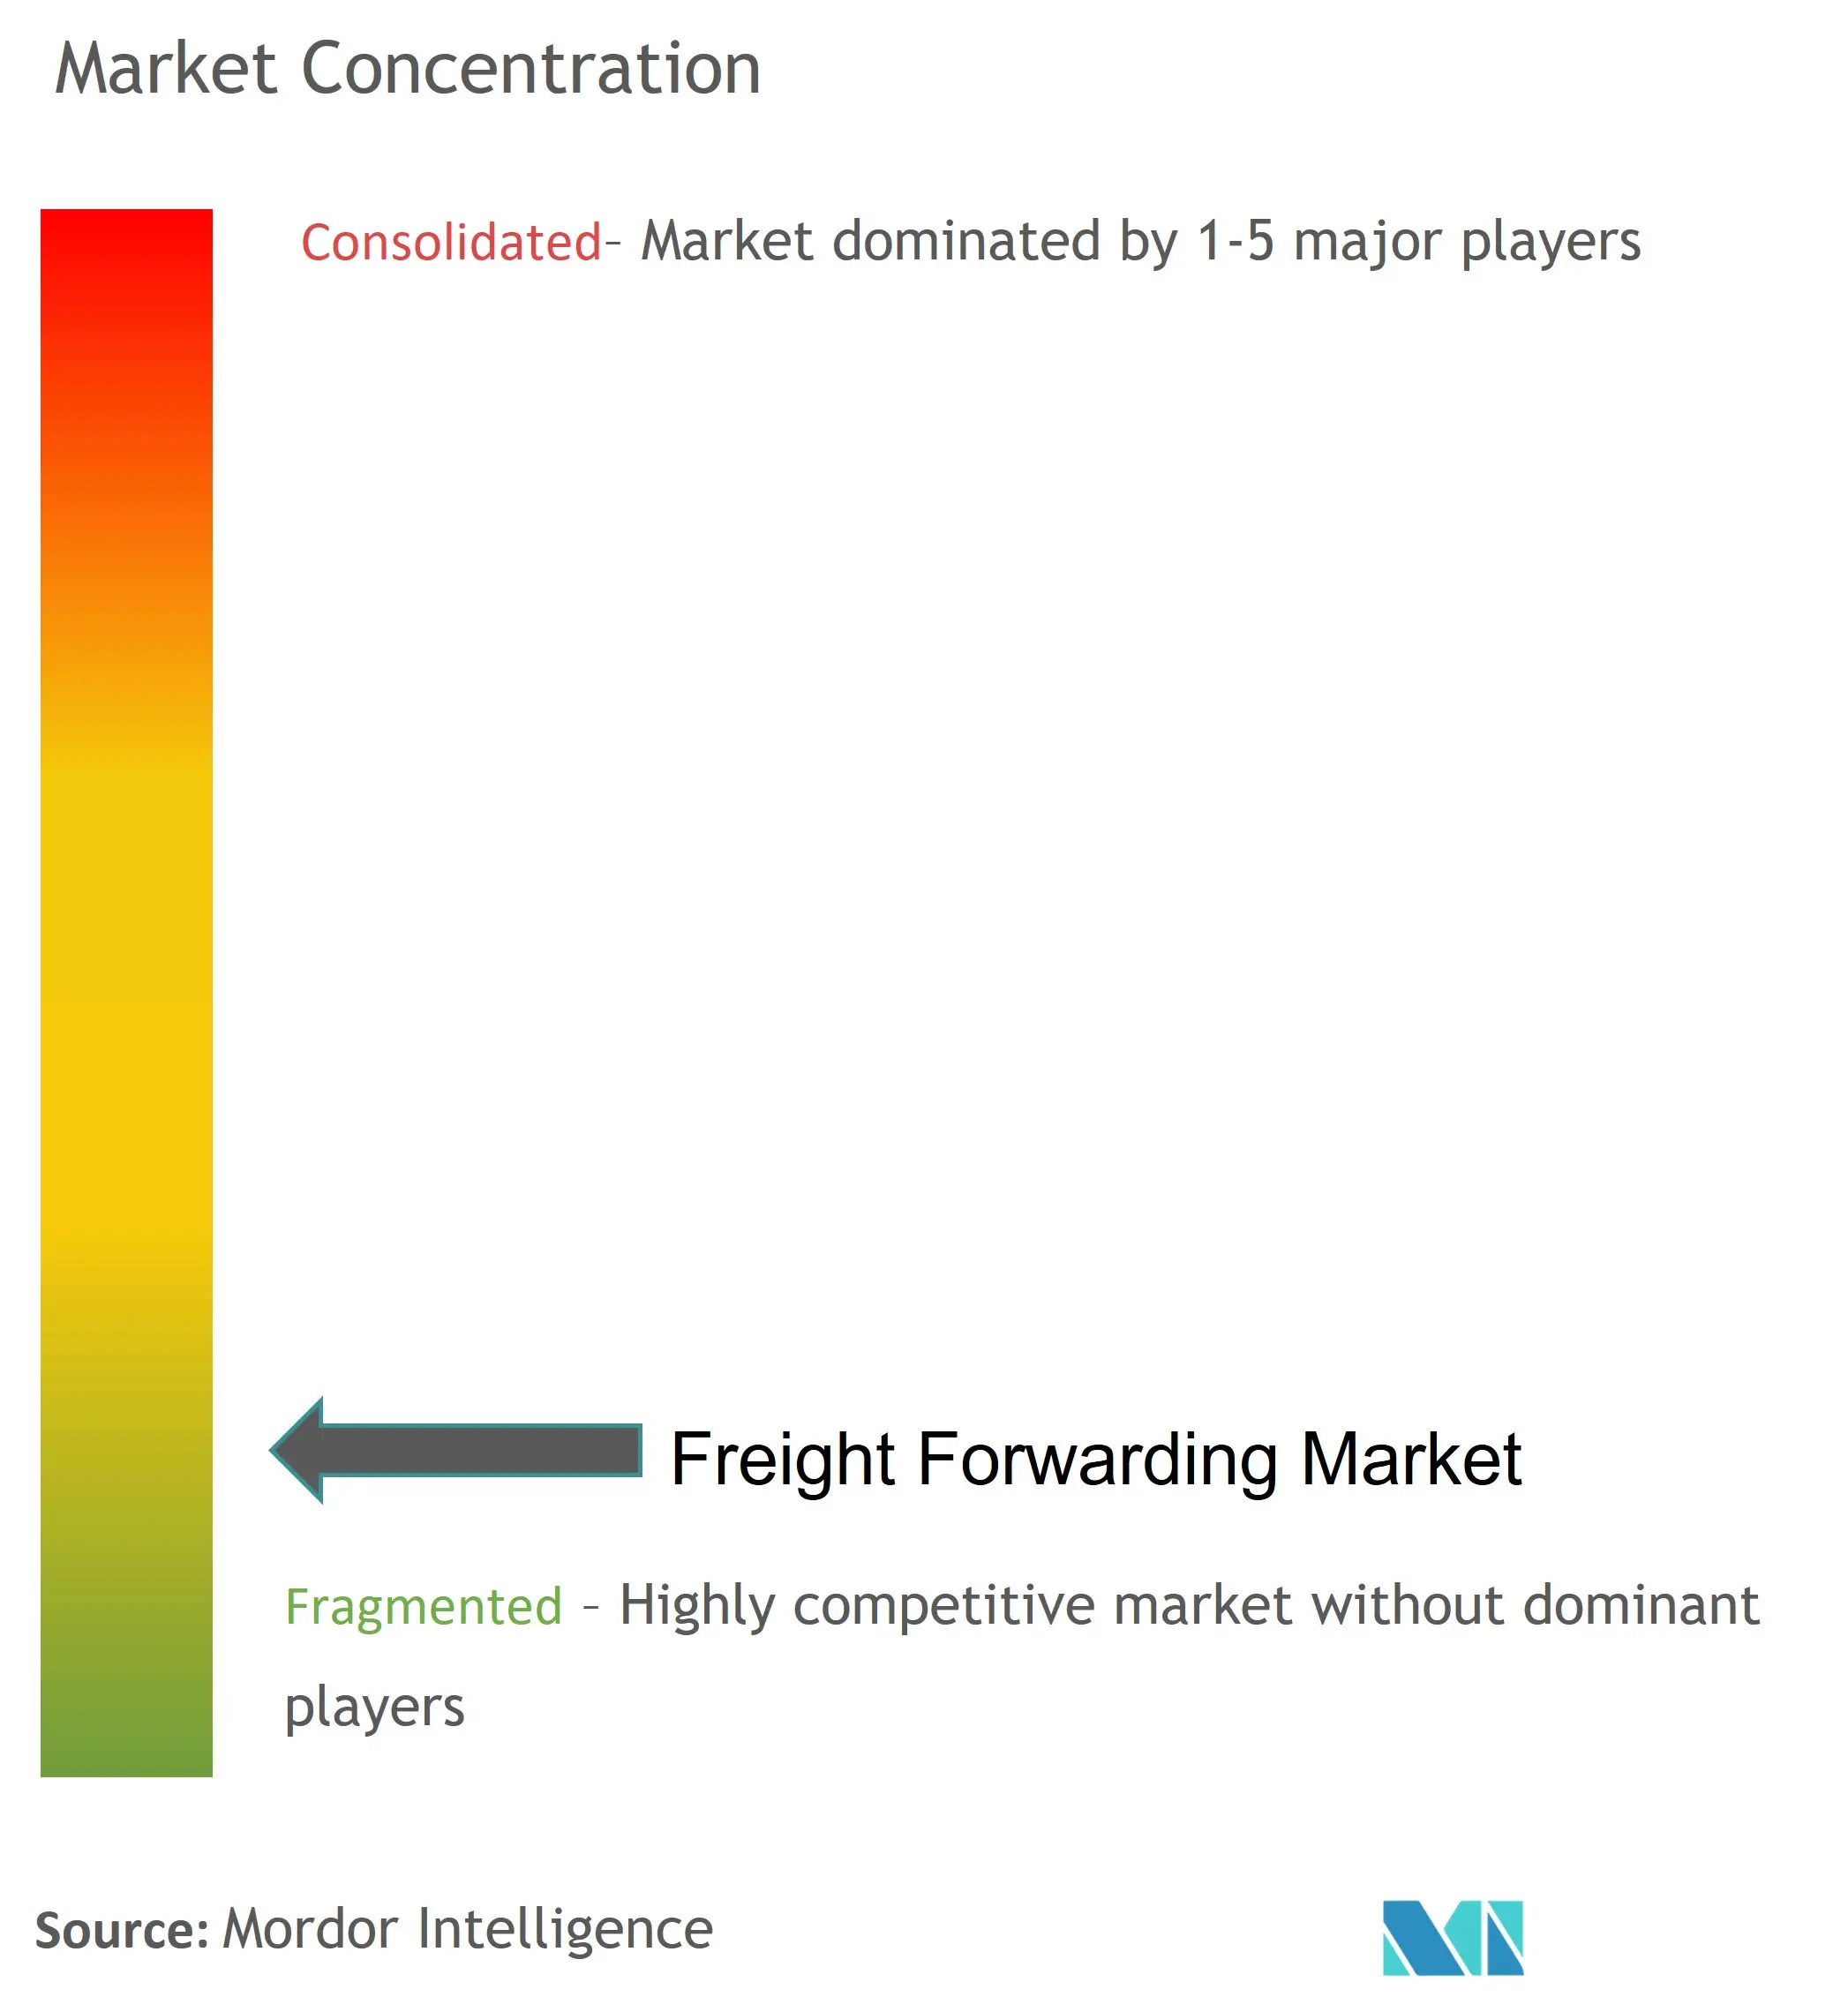 Freight Forwarding Market Concentration